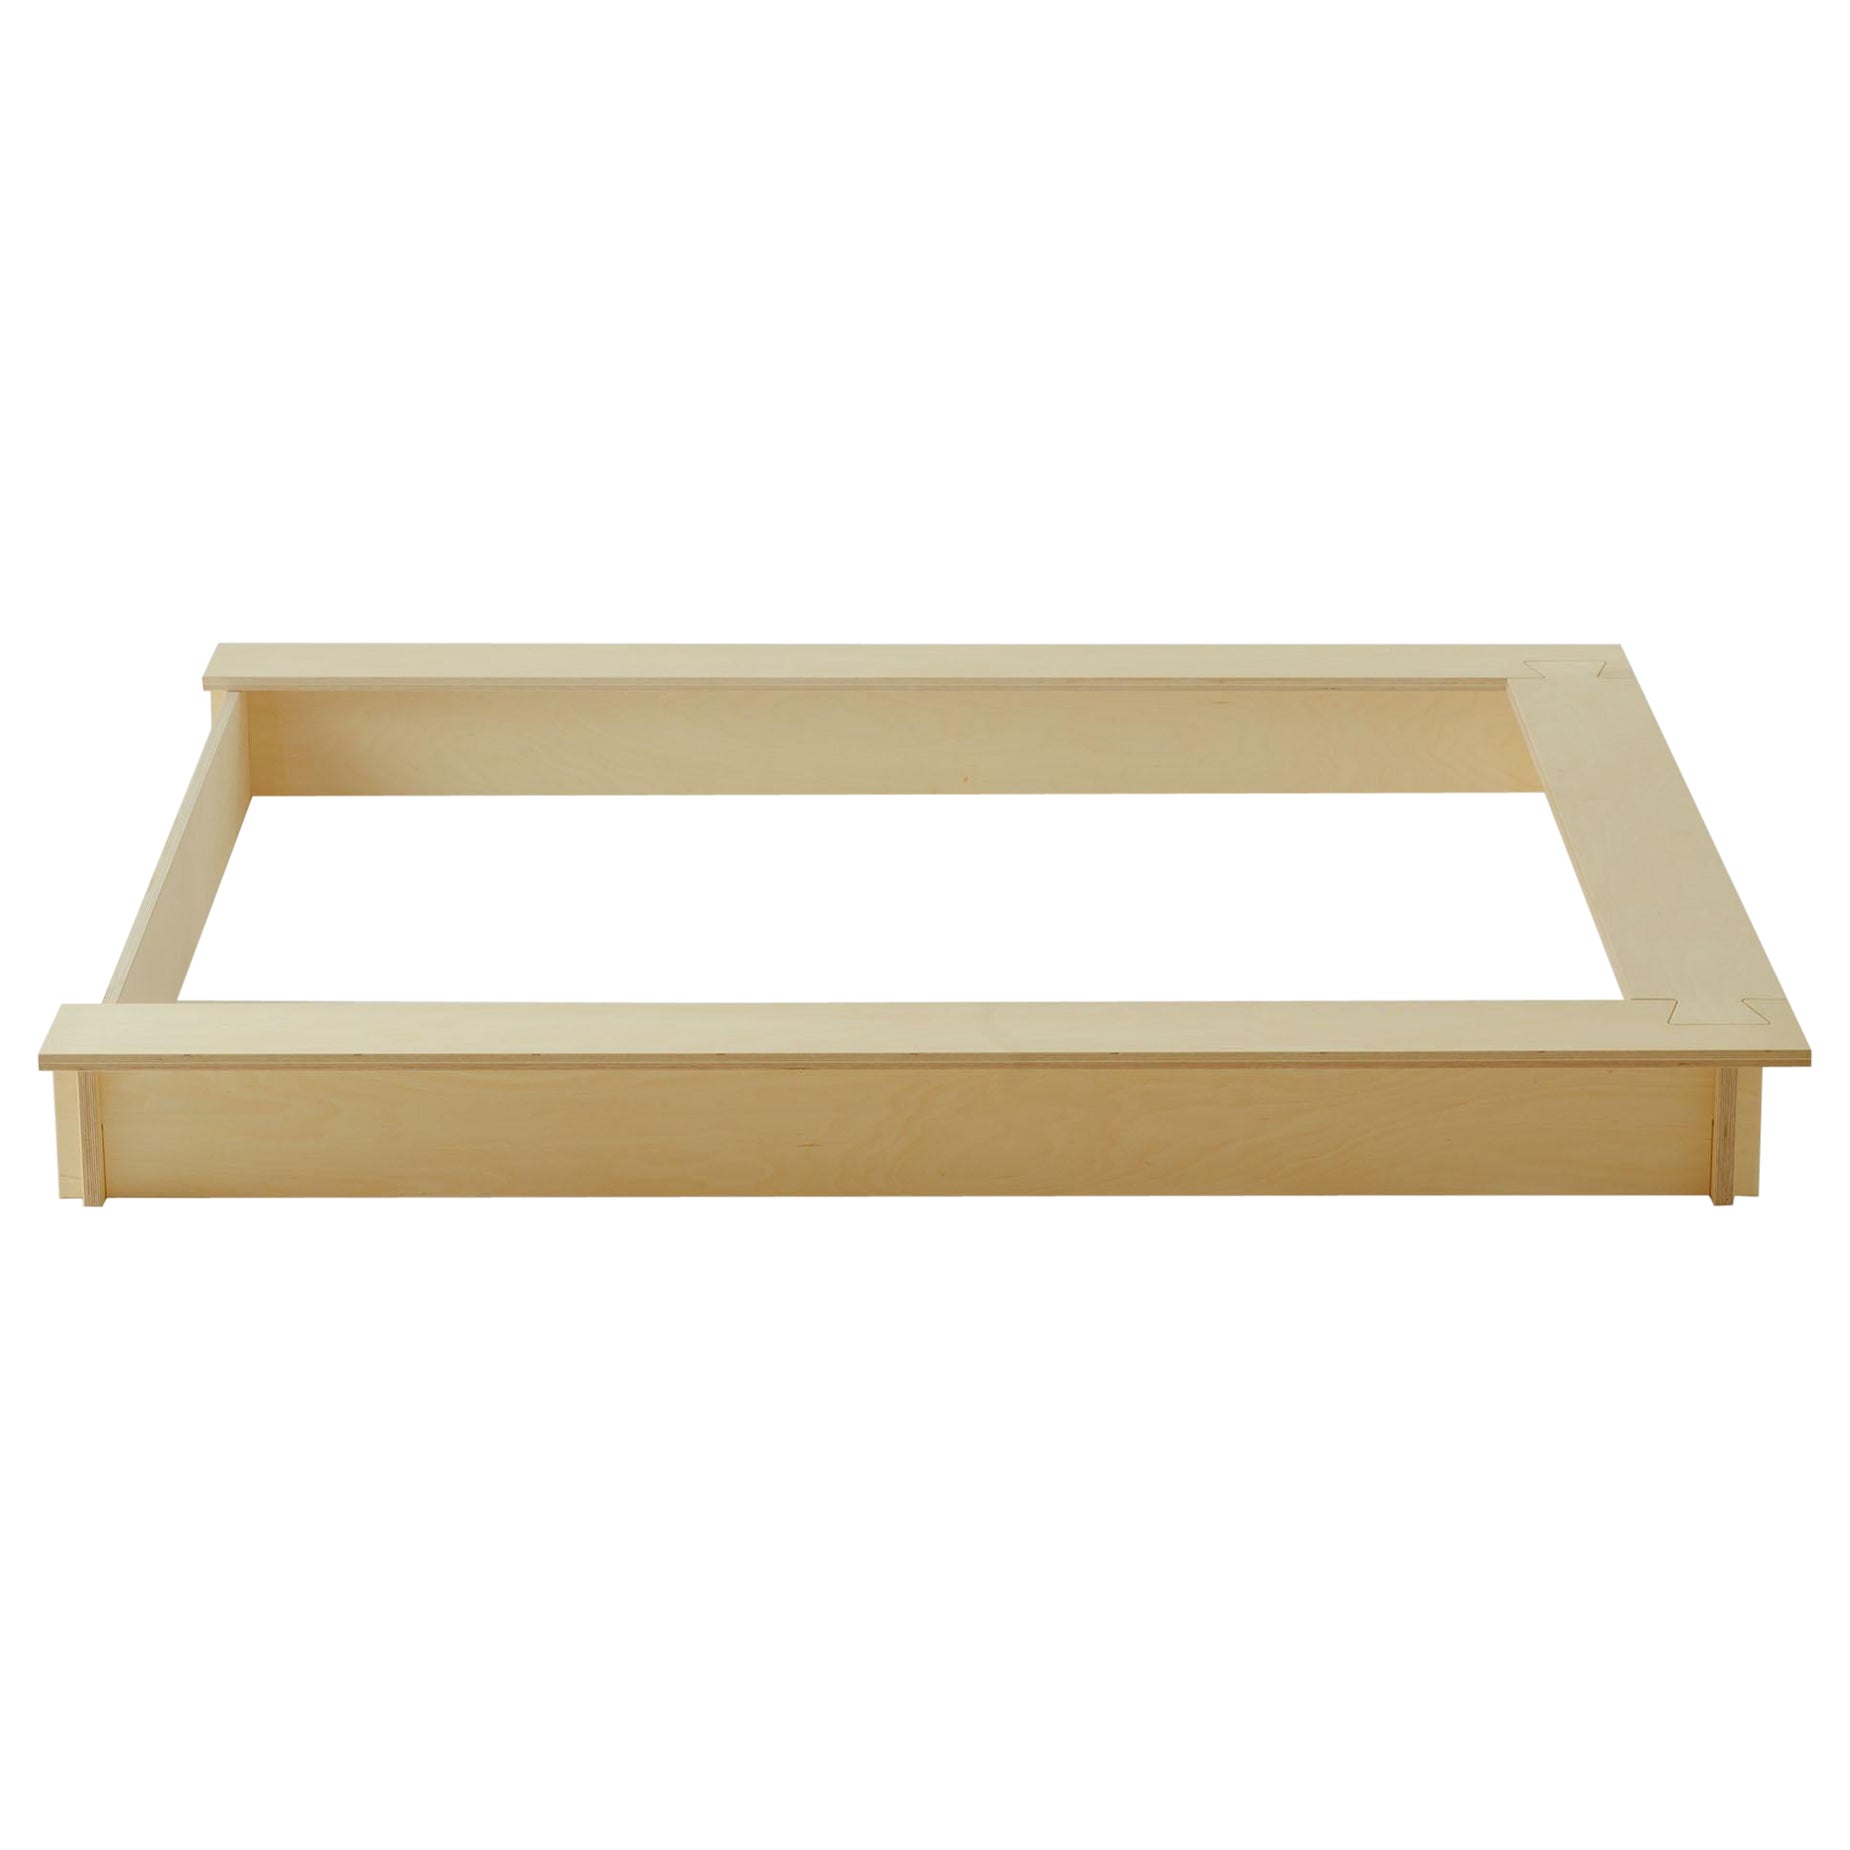 Minimalist Birch Dovetail Bed, Judd Style - by The Future is Flat For Sale